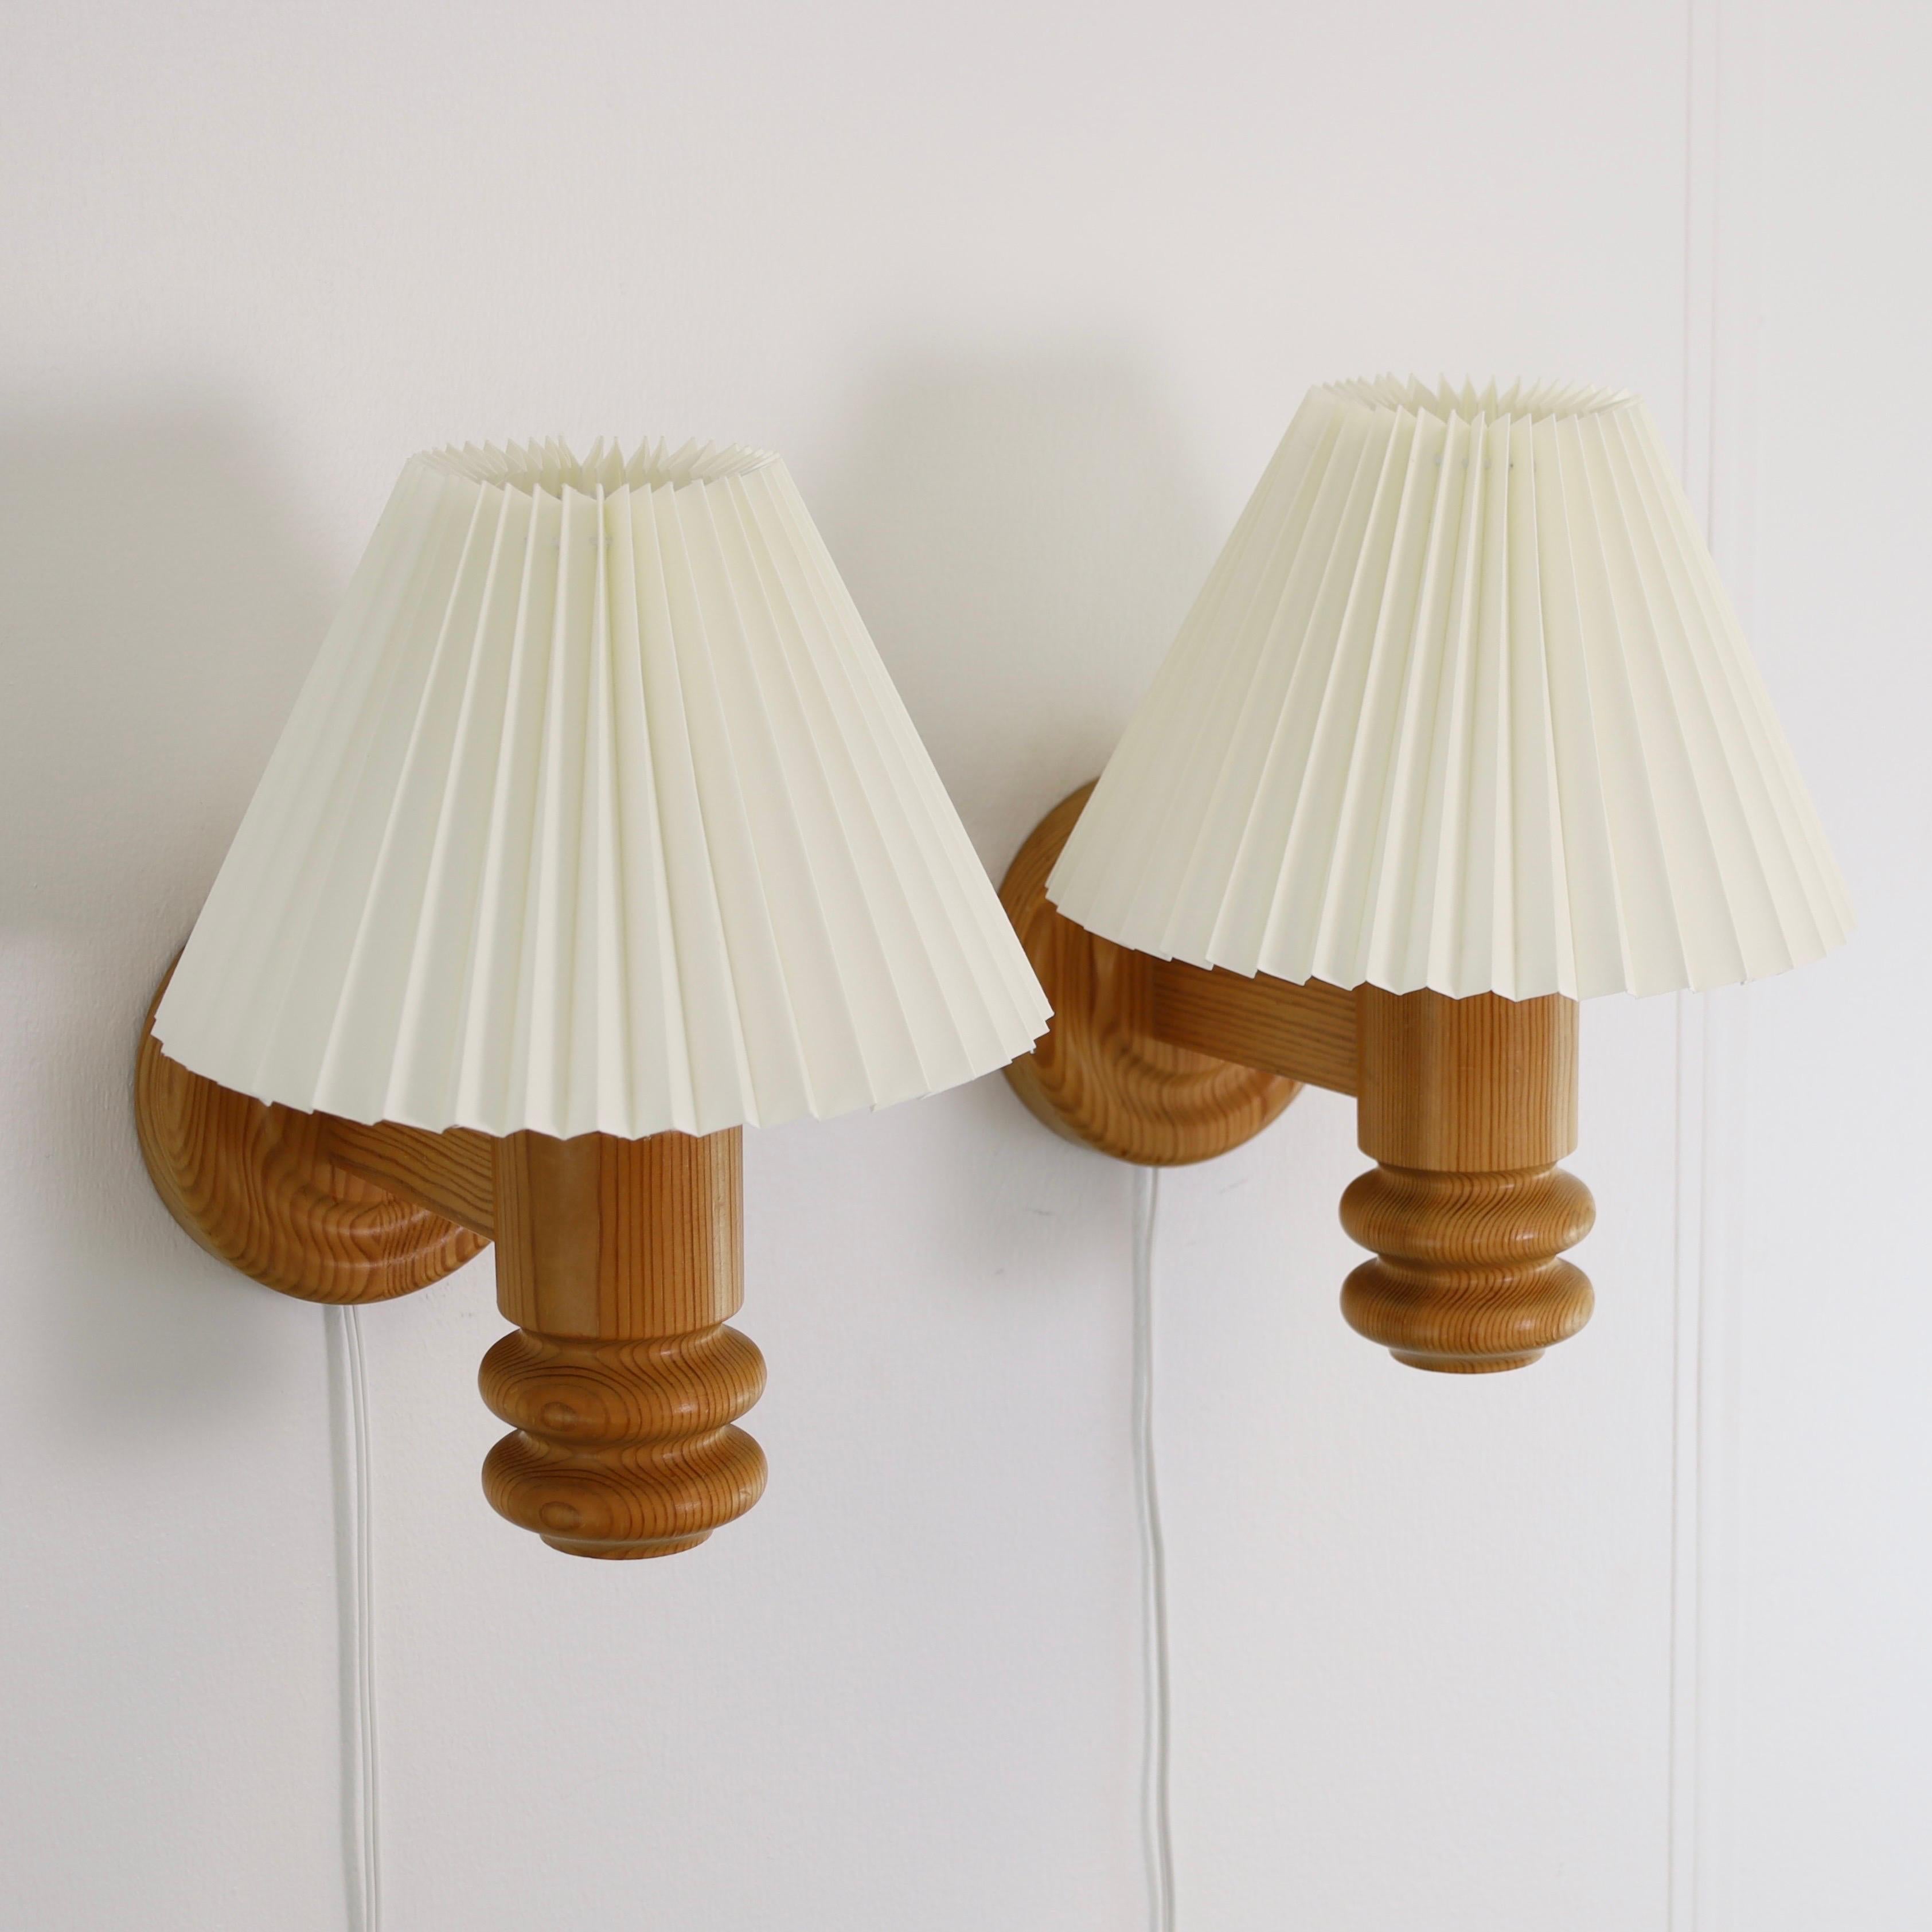 Set of Swedish Pine Wood Wall Lamps by Solbackens Svarveri, Sweden, 1970s For Sale 2